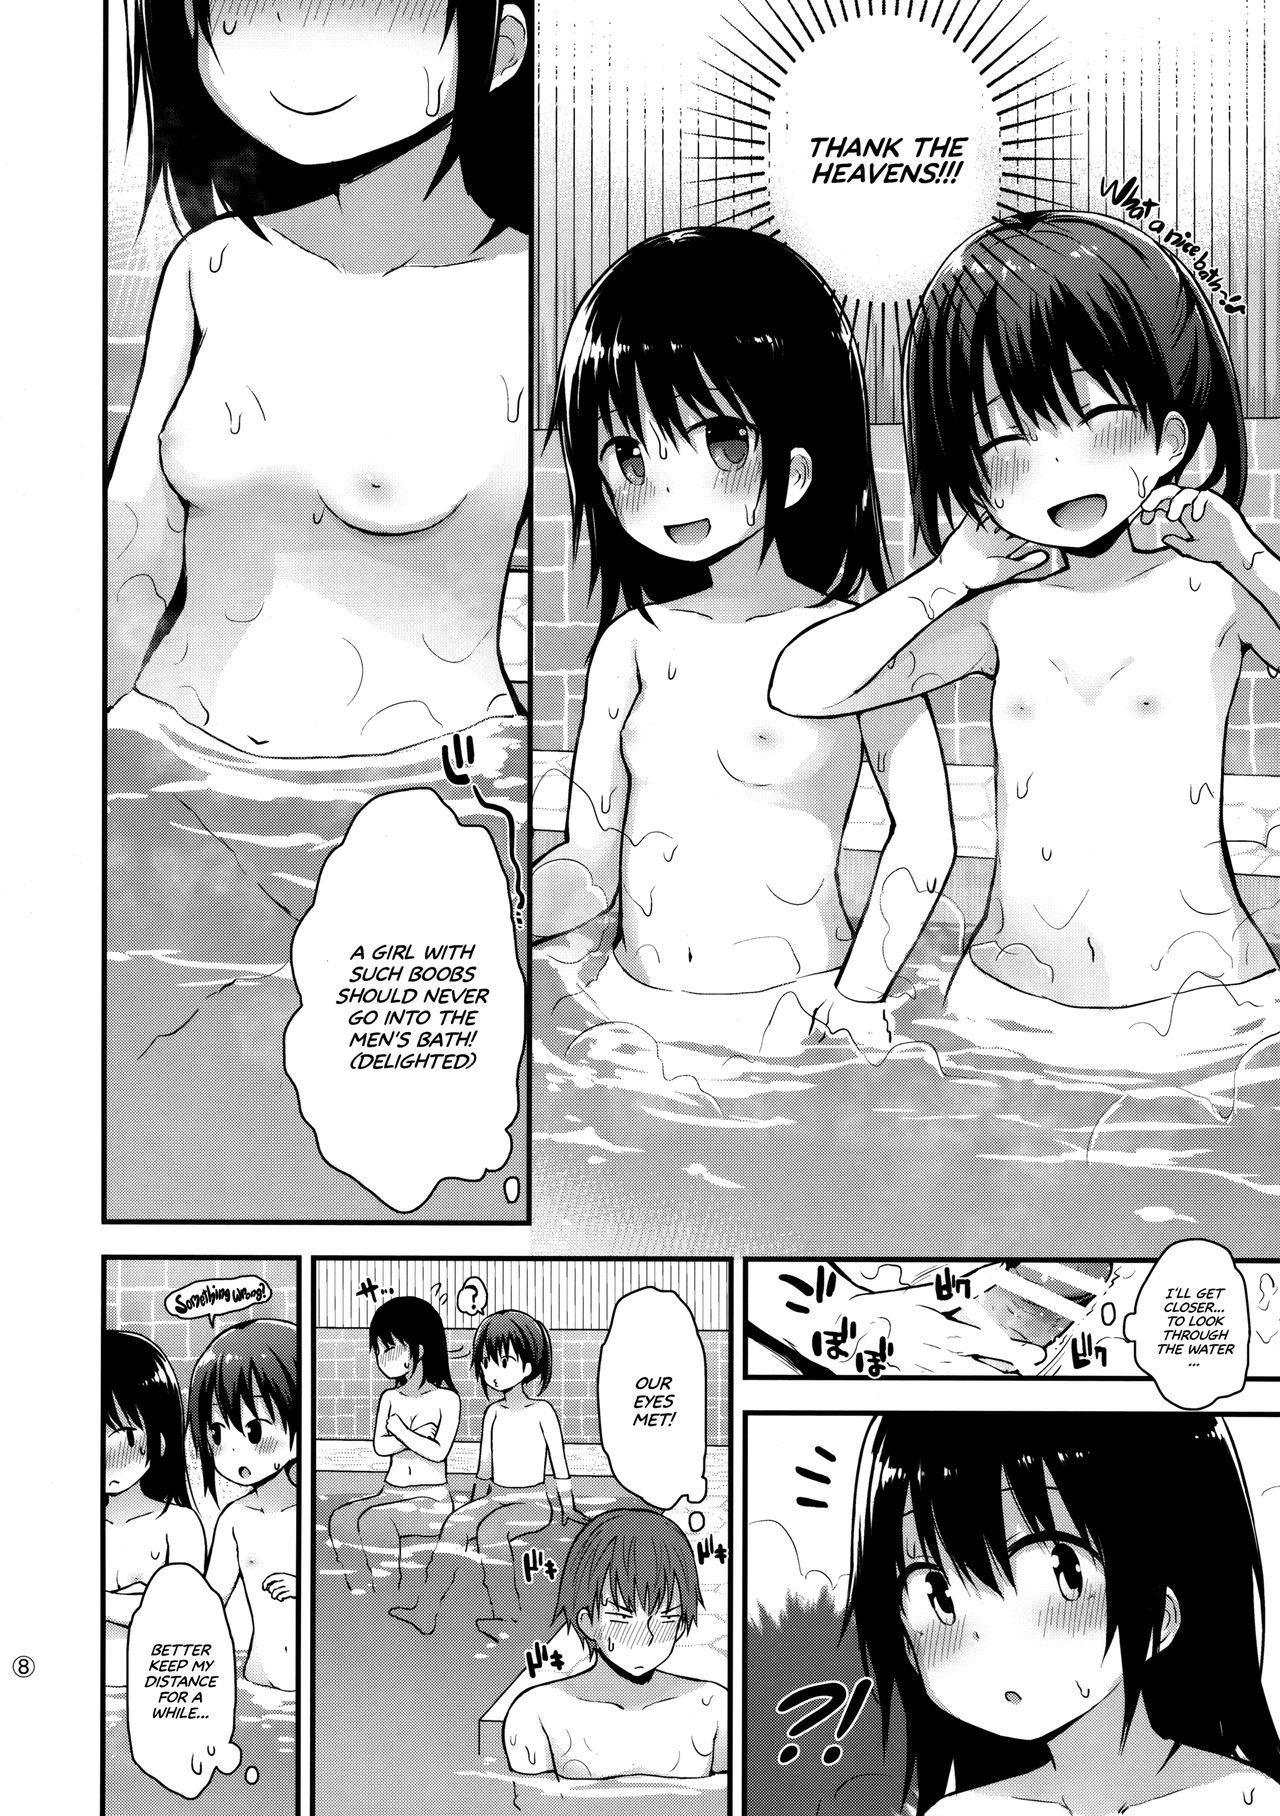 All Natural Onnanoko datte Otokoyu ni Hairitai | They may just be little girls, but they still want to enter the men’s bath! – Original Couples - Chapter 6